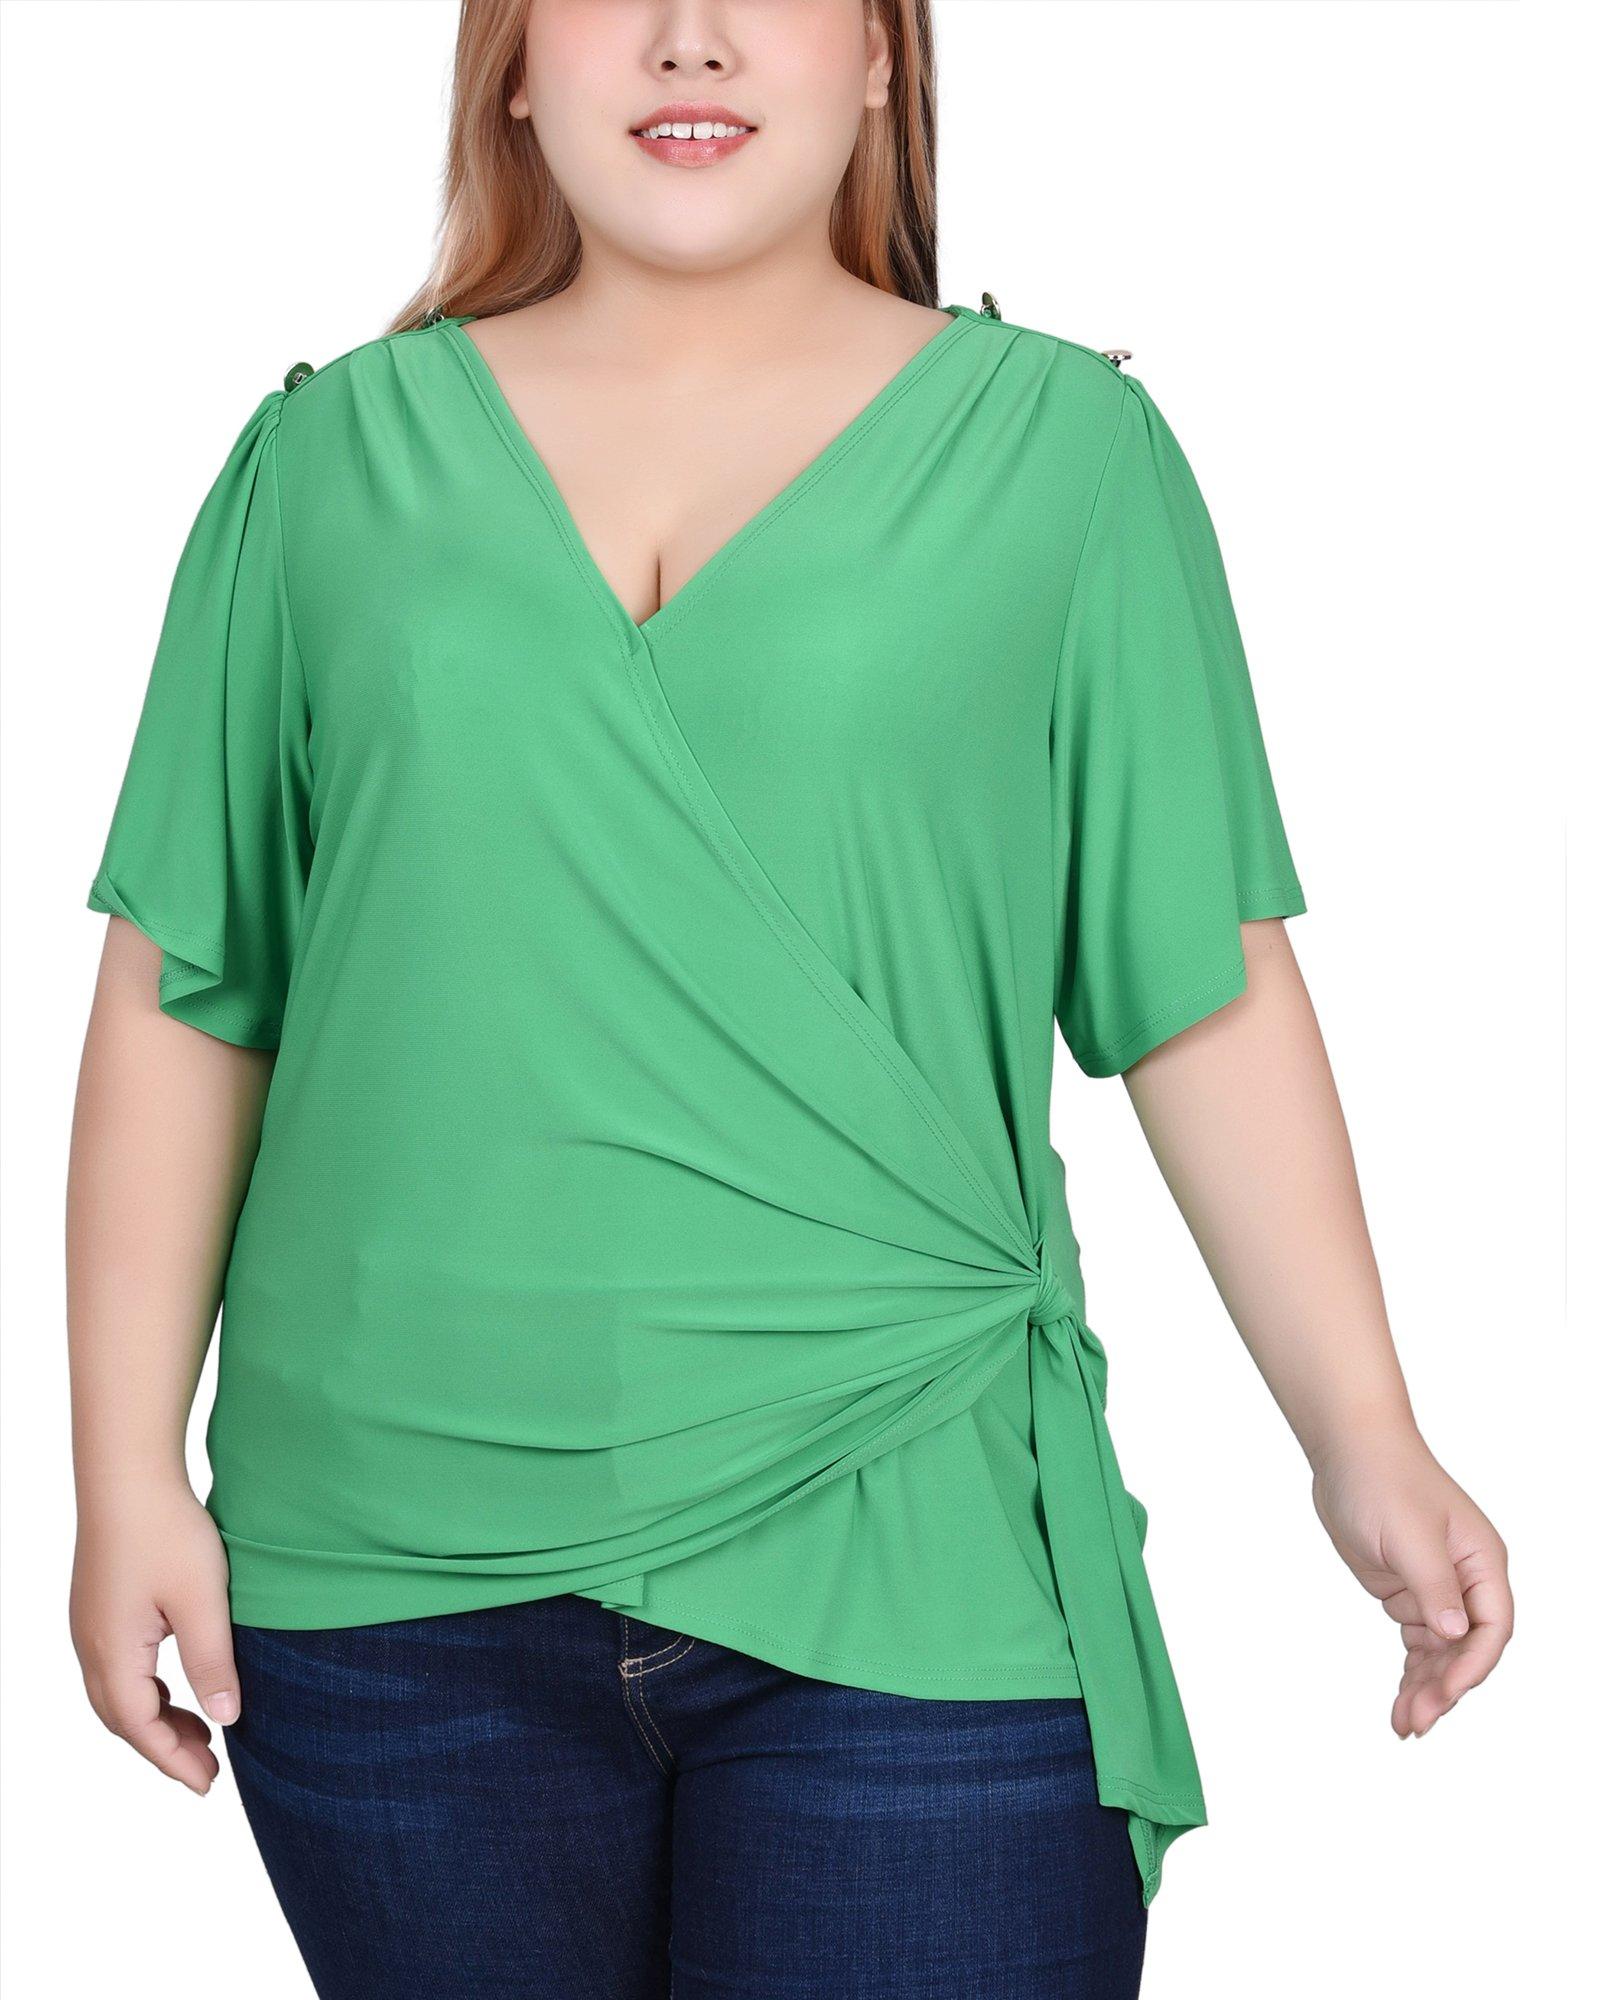 NY Collection Womens Short Sleeve Wrap Top